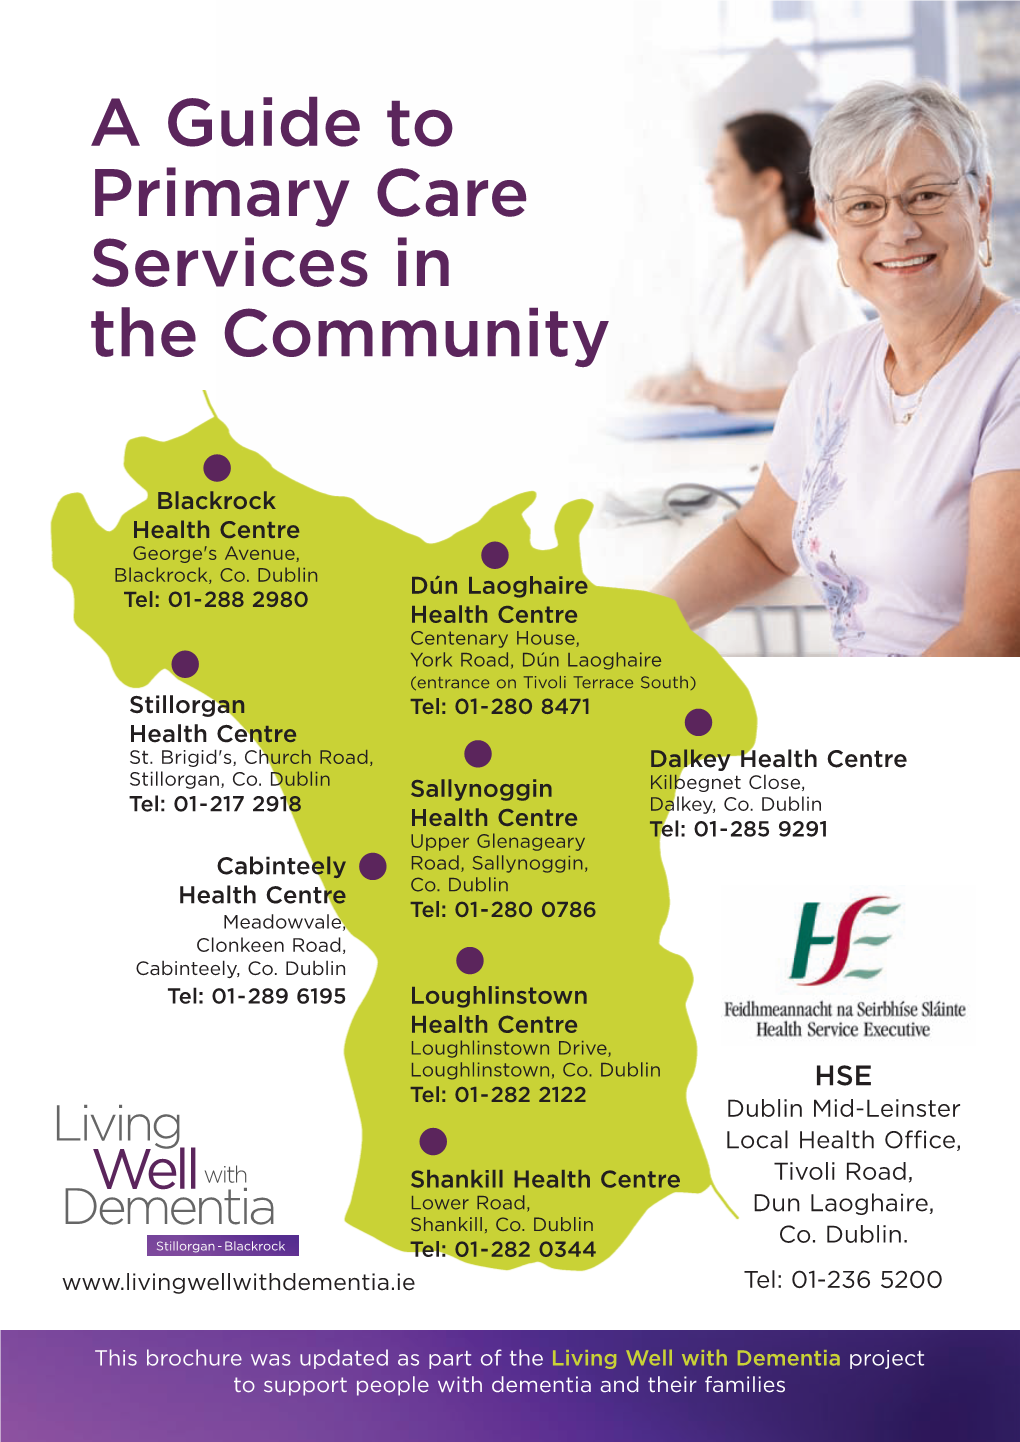 A Guide to Primary Care Services in the Community